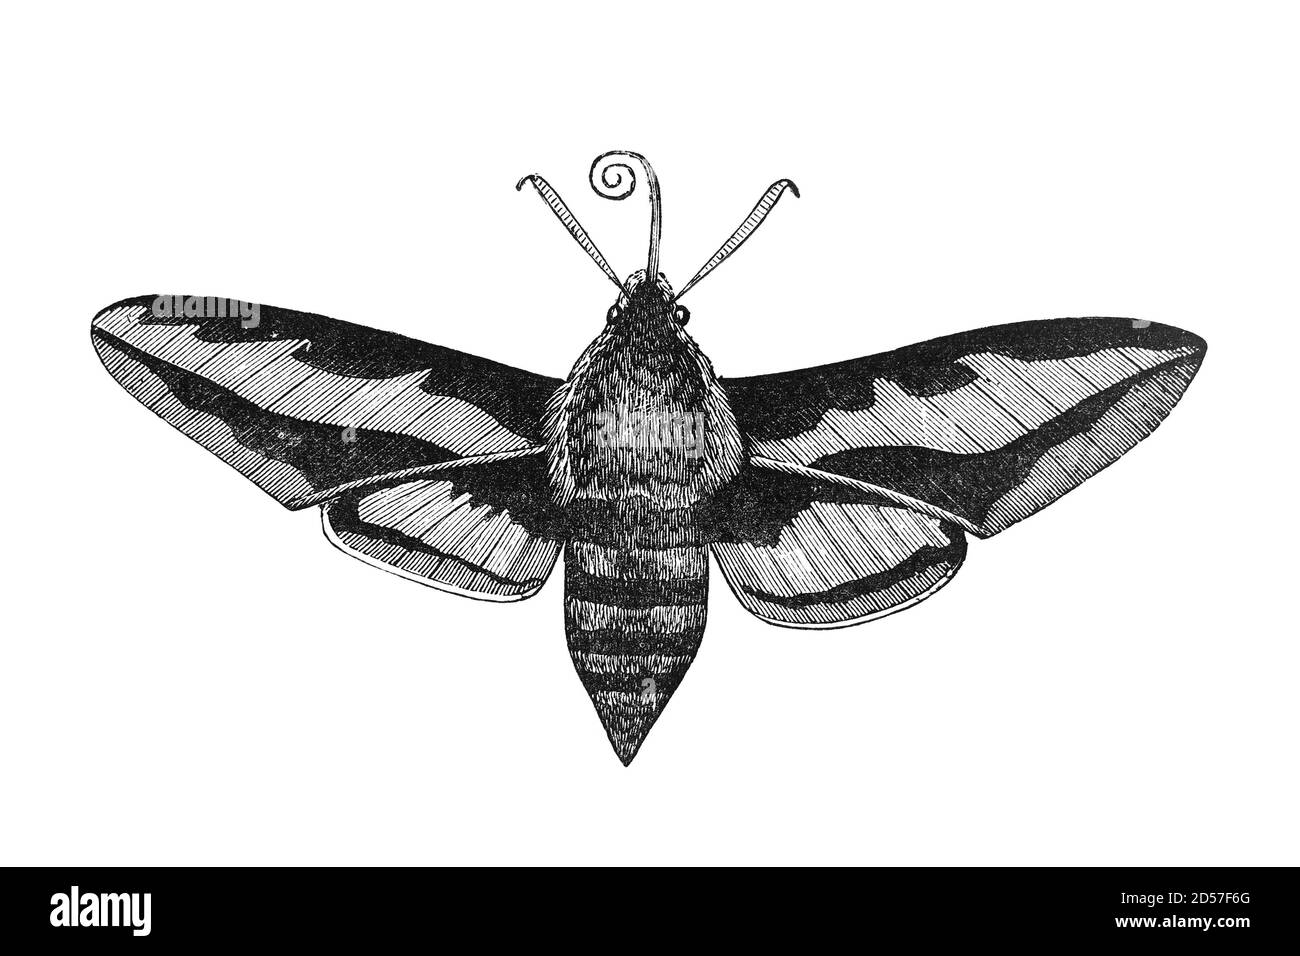 Bedstraw hawk moth insect, vintage illustration. Sourced from antique book 'The Playtime Naturalist' by Dr. J.E. Taylor, published in London UK, 1889. Stock Photo